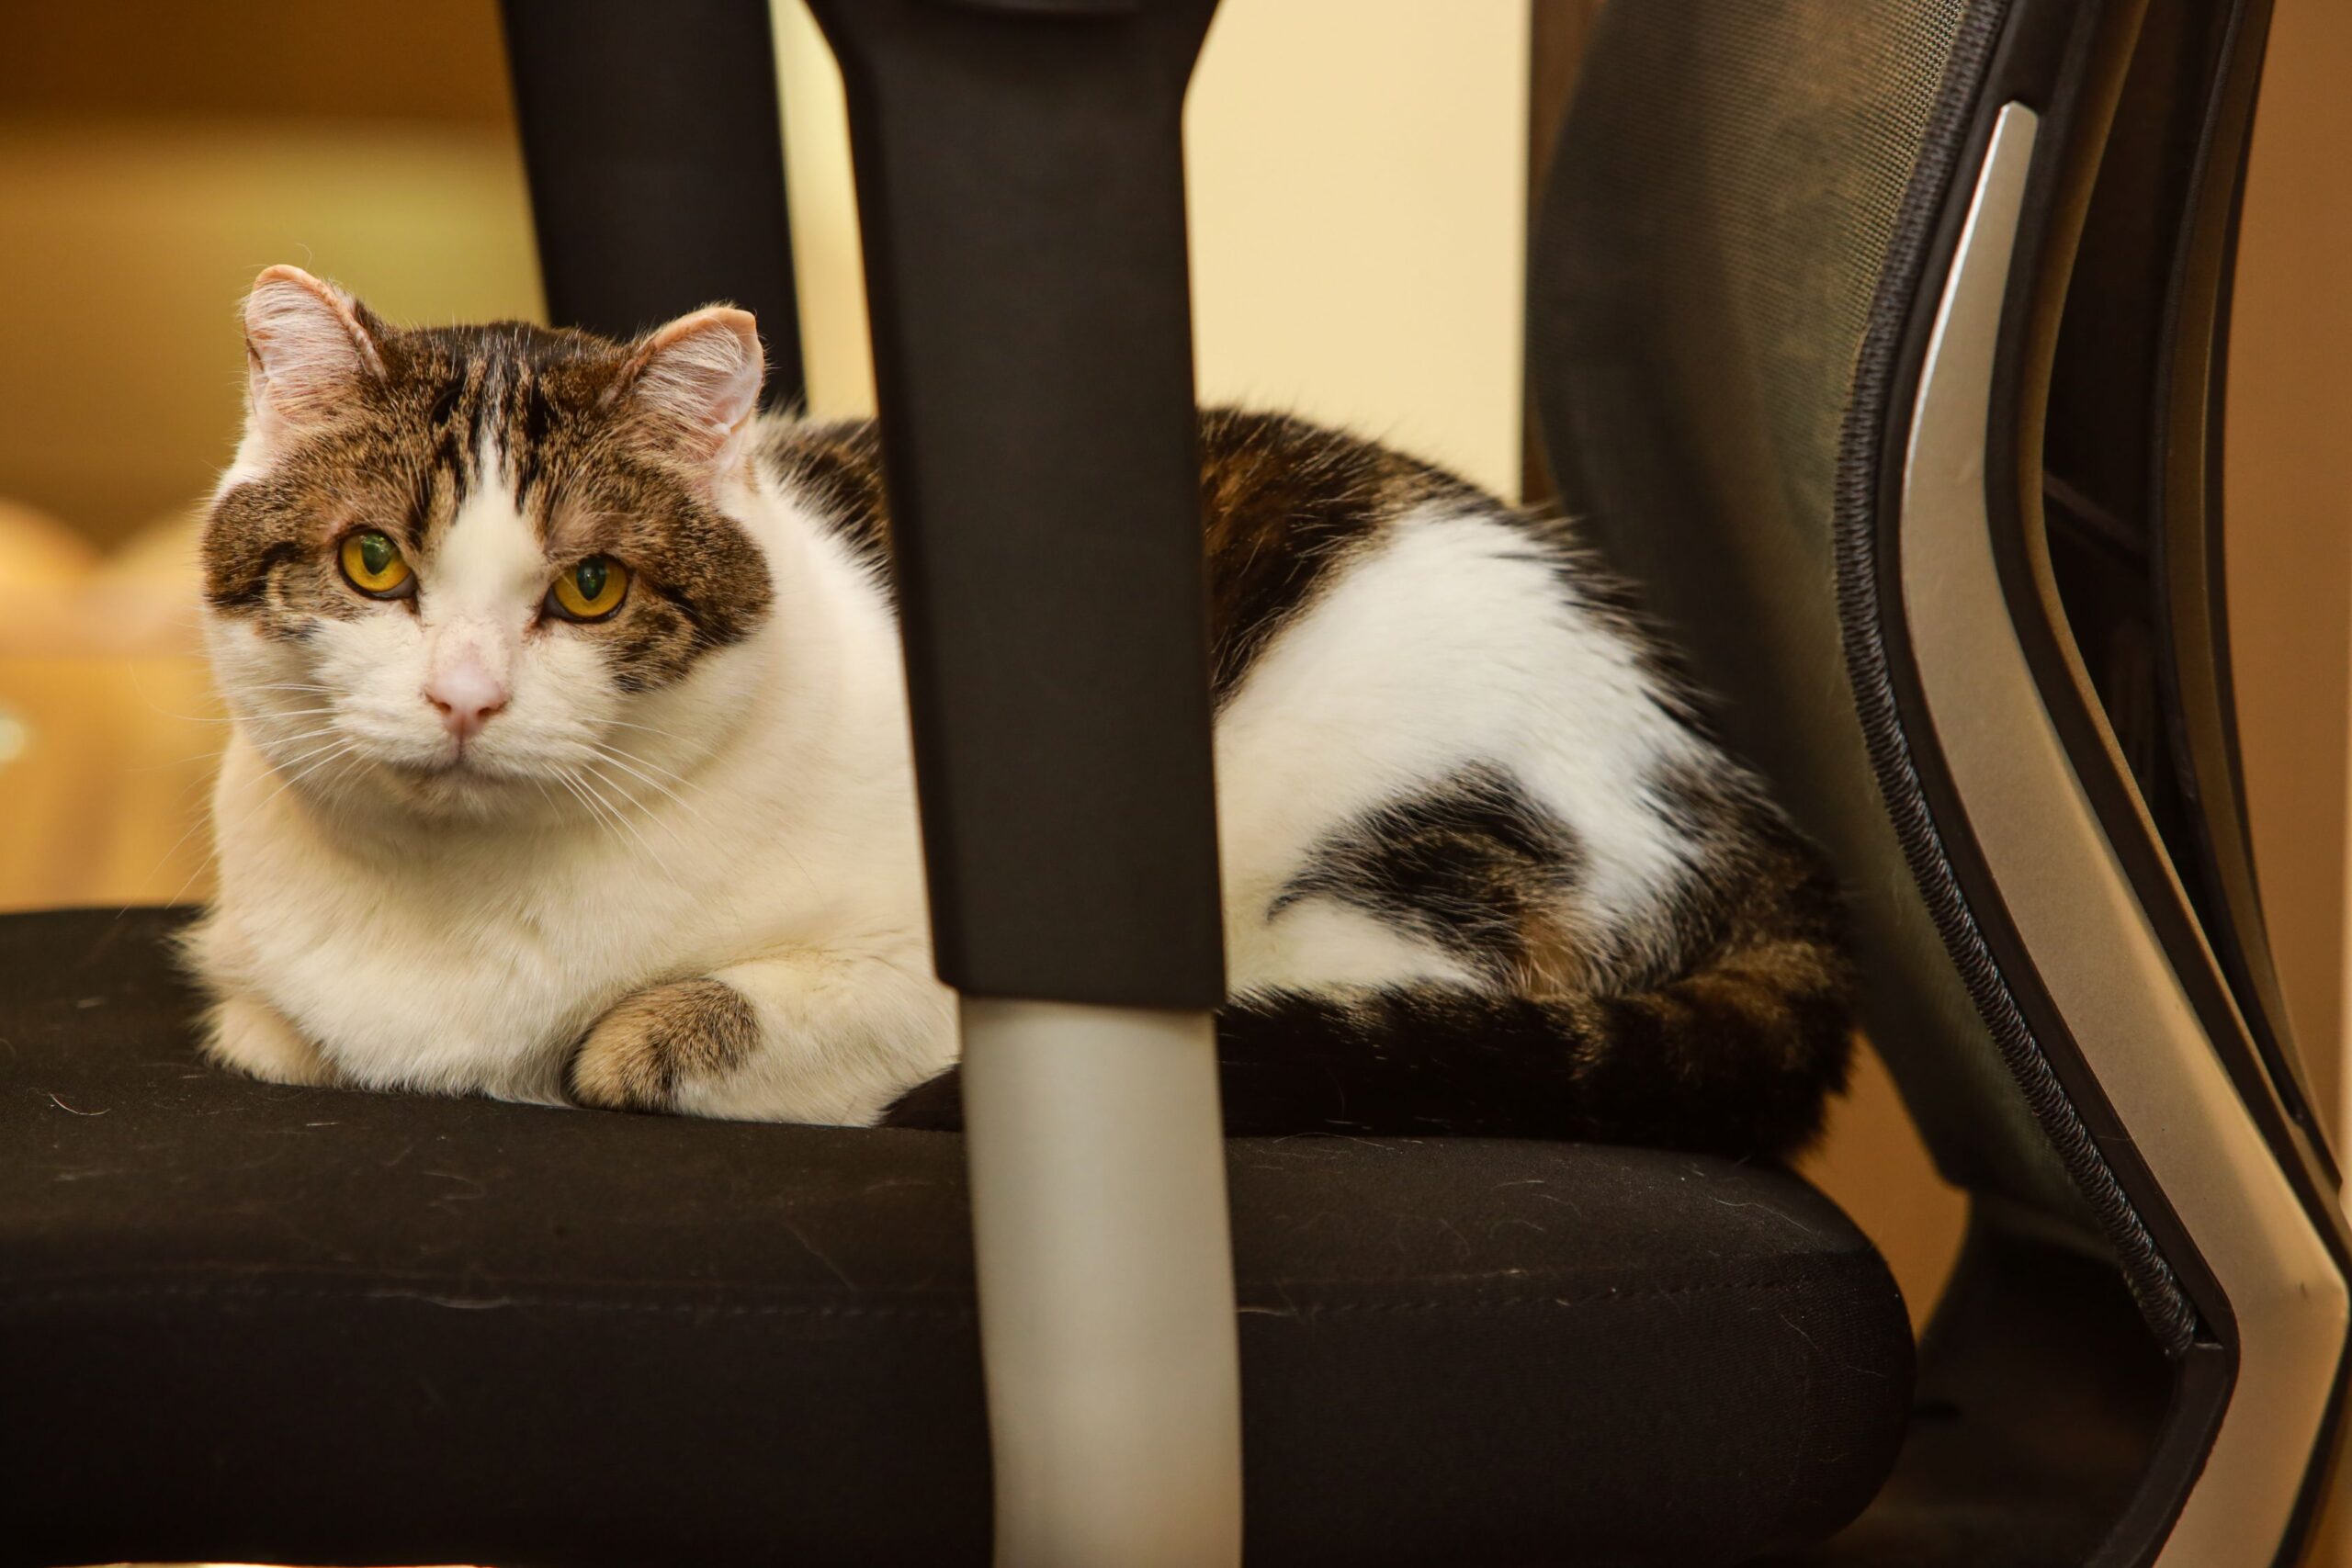 A cat sitting on an office chair